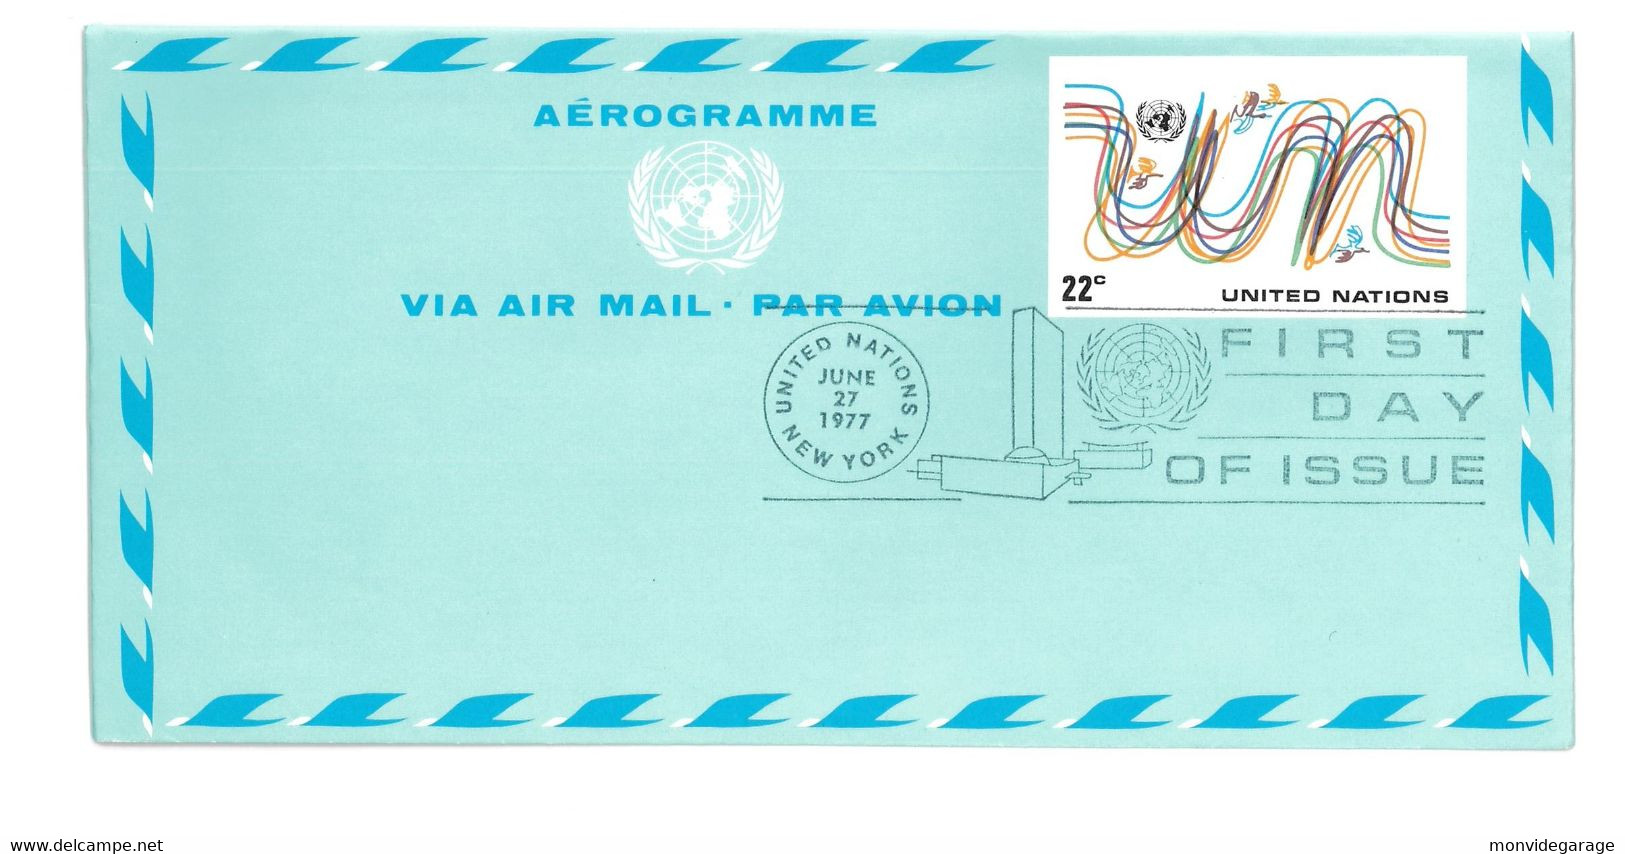 United Nations - Aérogramme - Via Air Mail - Par Avion - First Day Of Issue - 1977 - New York 093 - Luftpost